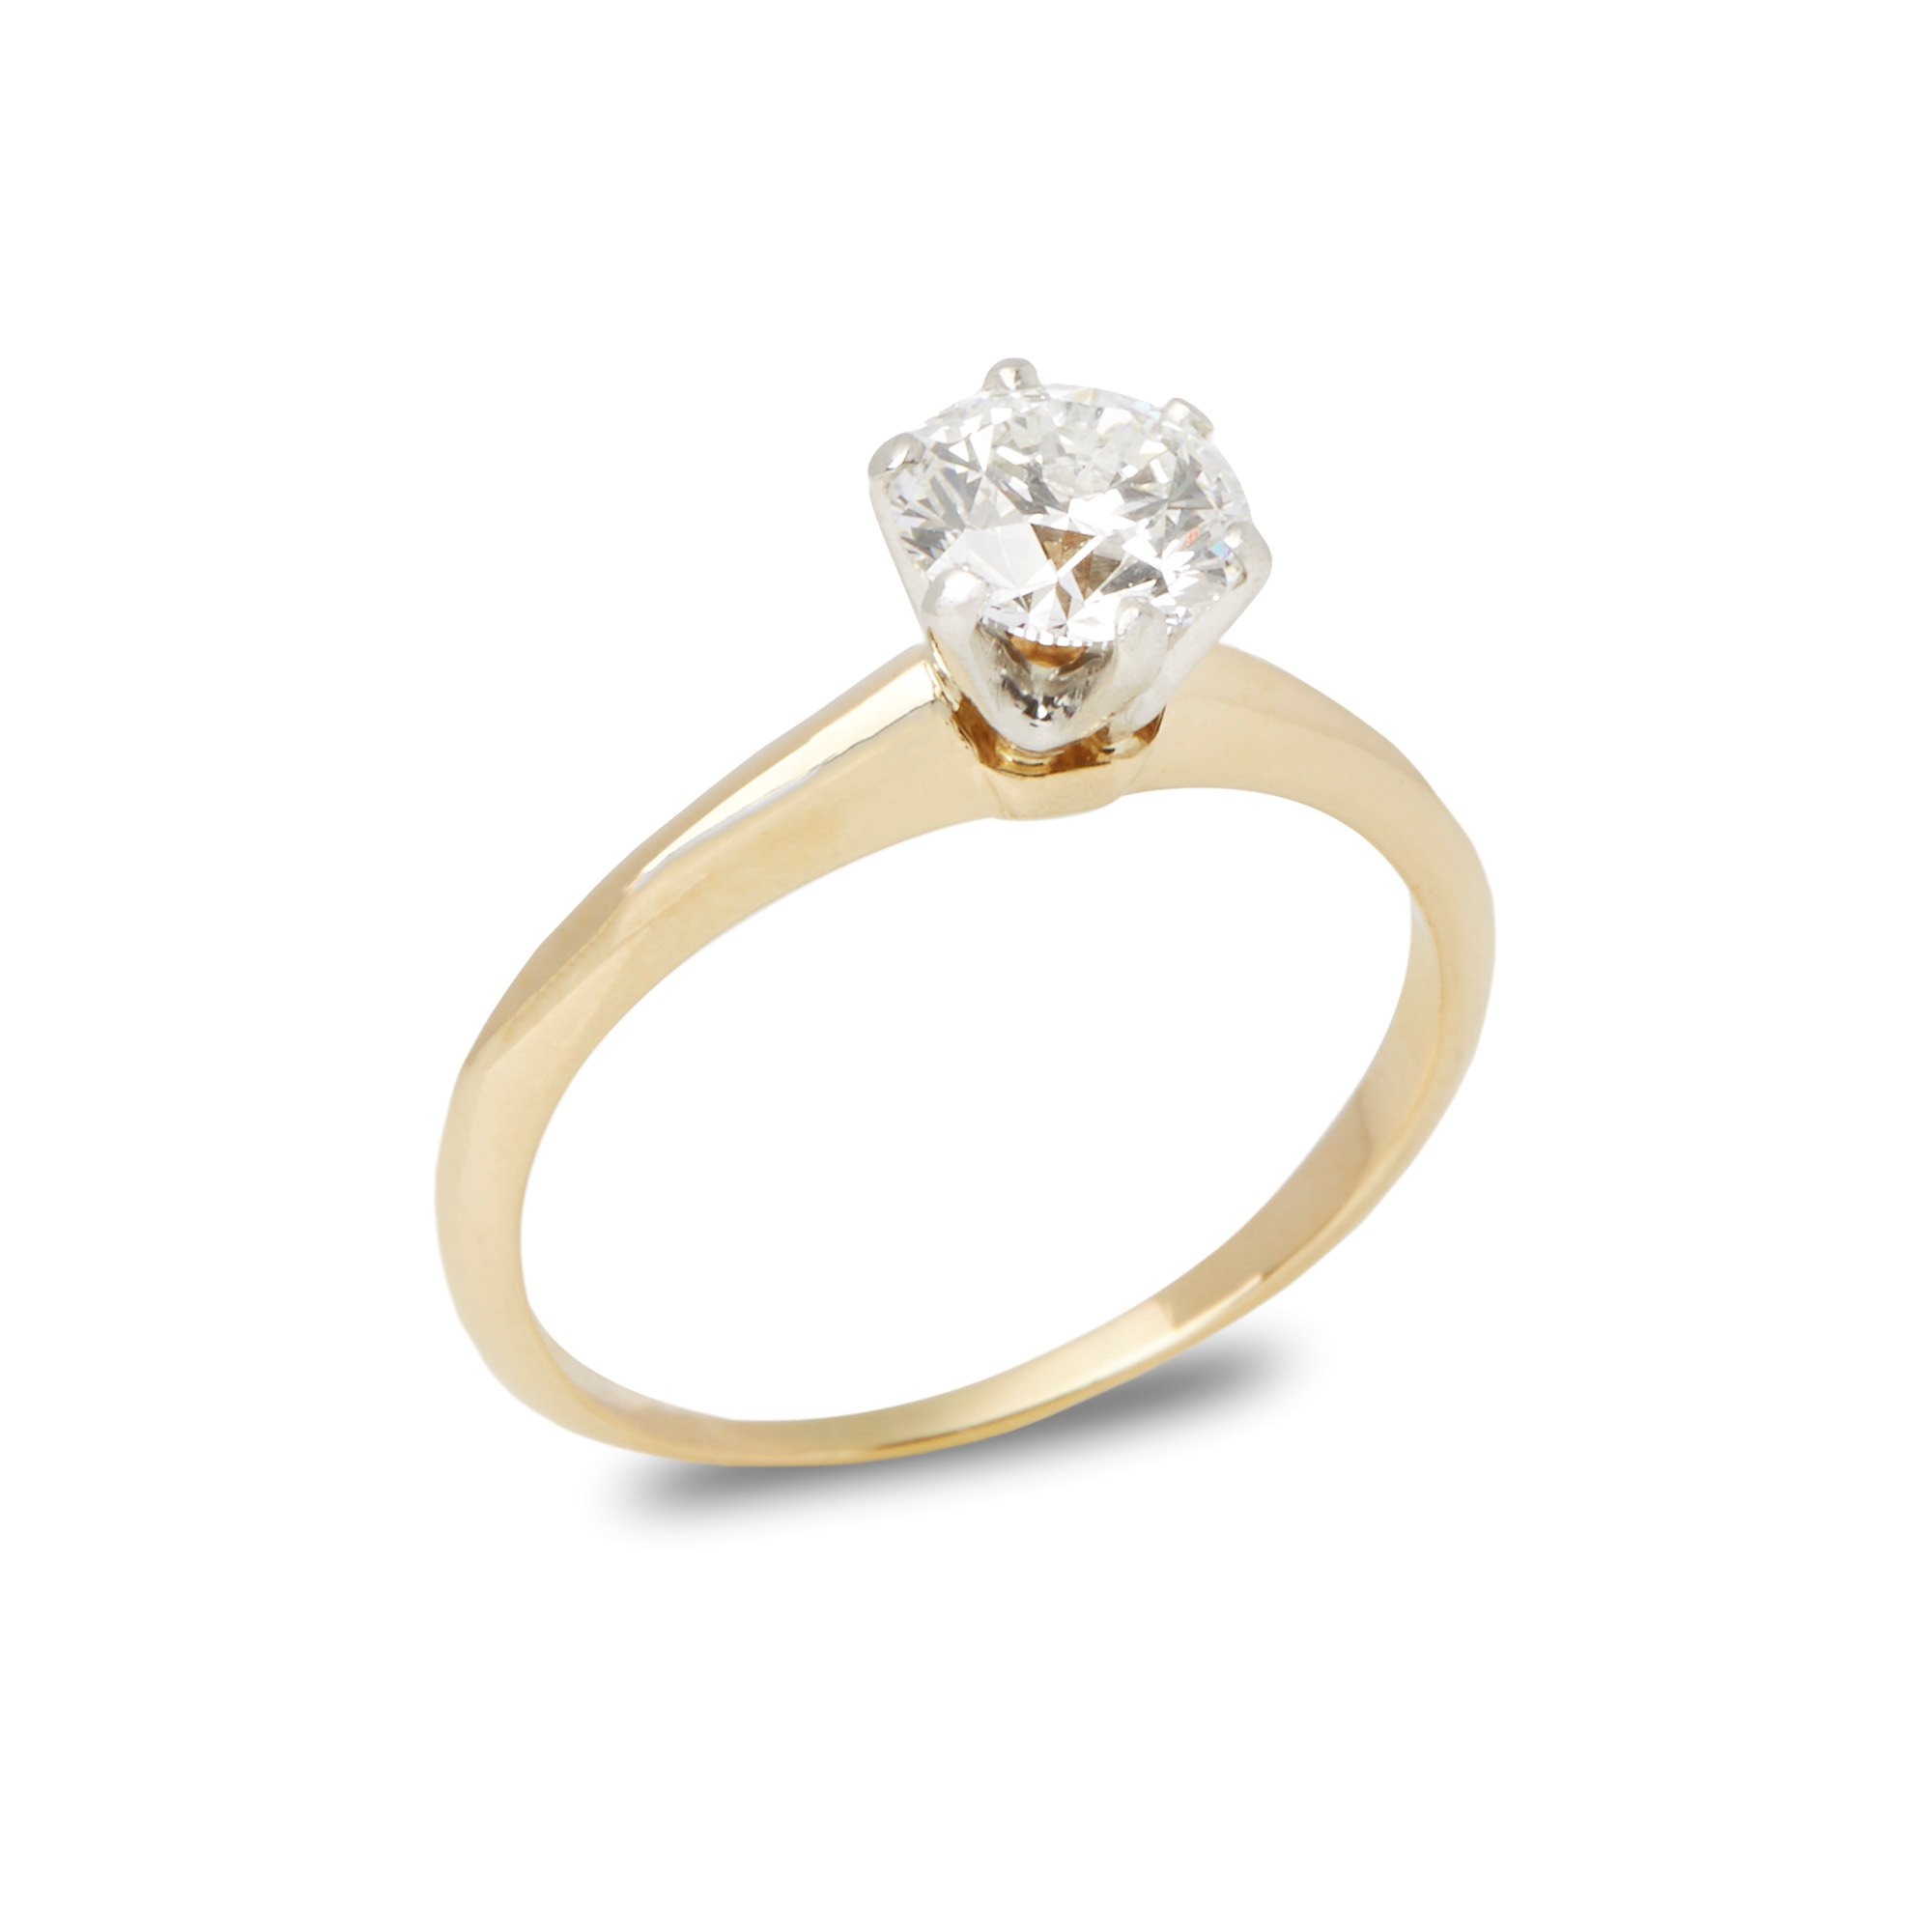 Tiffany & Co. 18k Yellow Gold Solitaire Diamond Ring